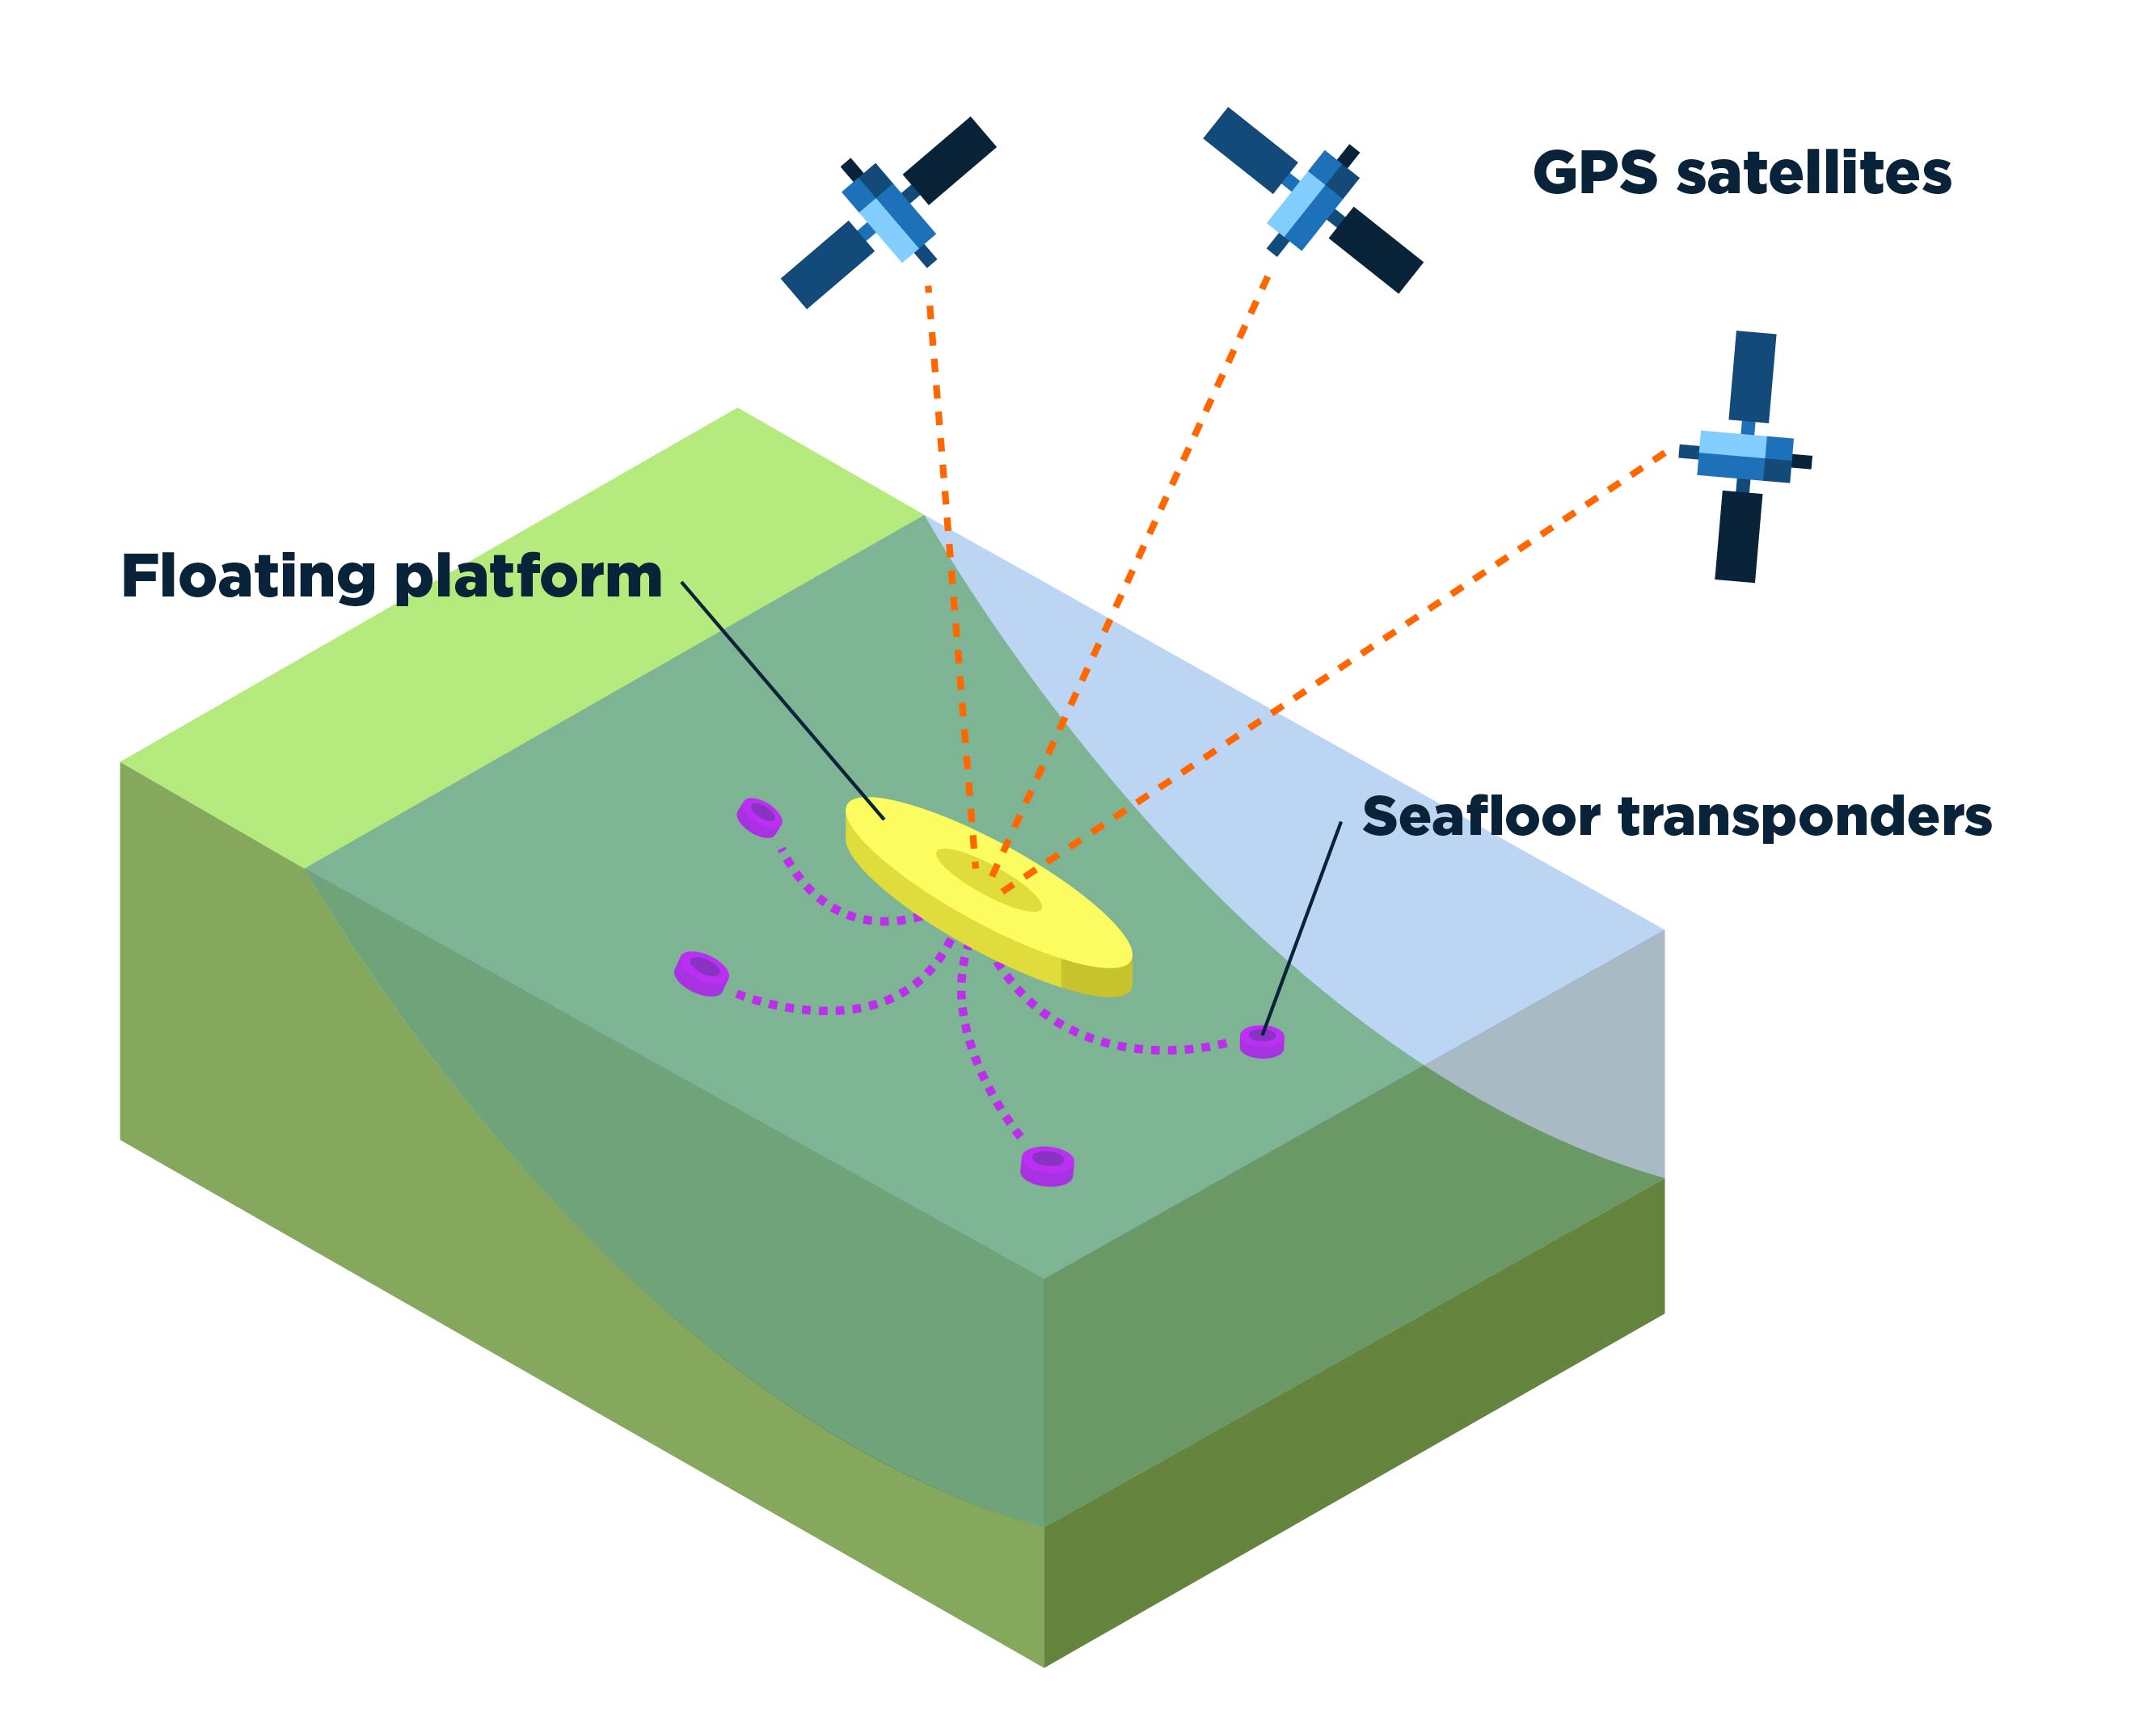 Graphic shows how GPS satellites in the sky send signals to a floating platform (the size of a large surfboard) which sends and received signals from transponders on the ocean floor to study earthquakes on the bottom of the ocean.